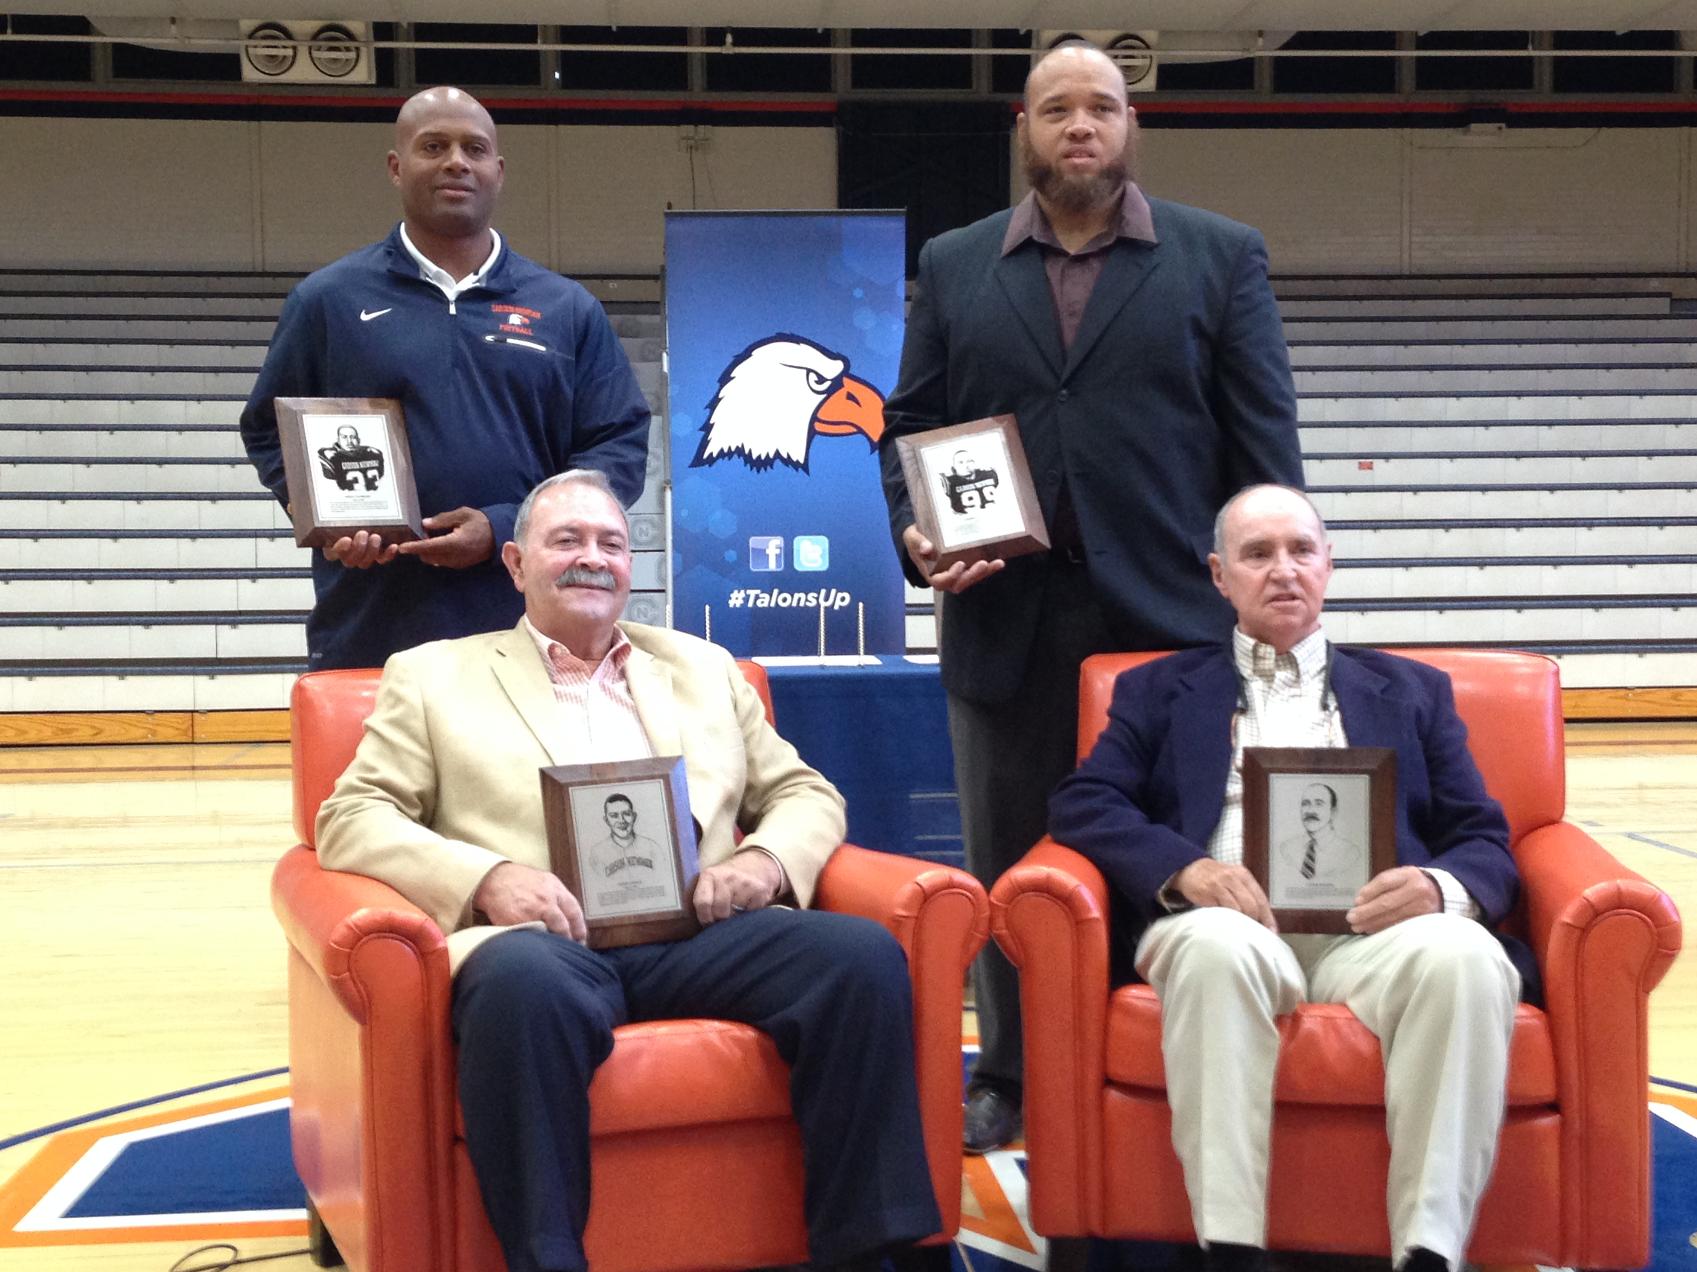 C-N welcomes class of 2016 into its Athletics Hall of Fame